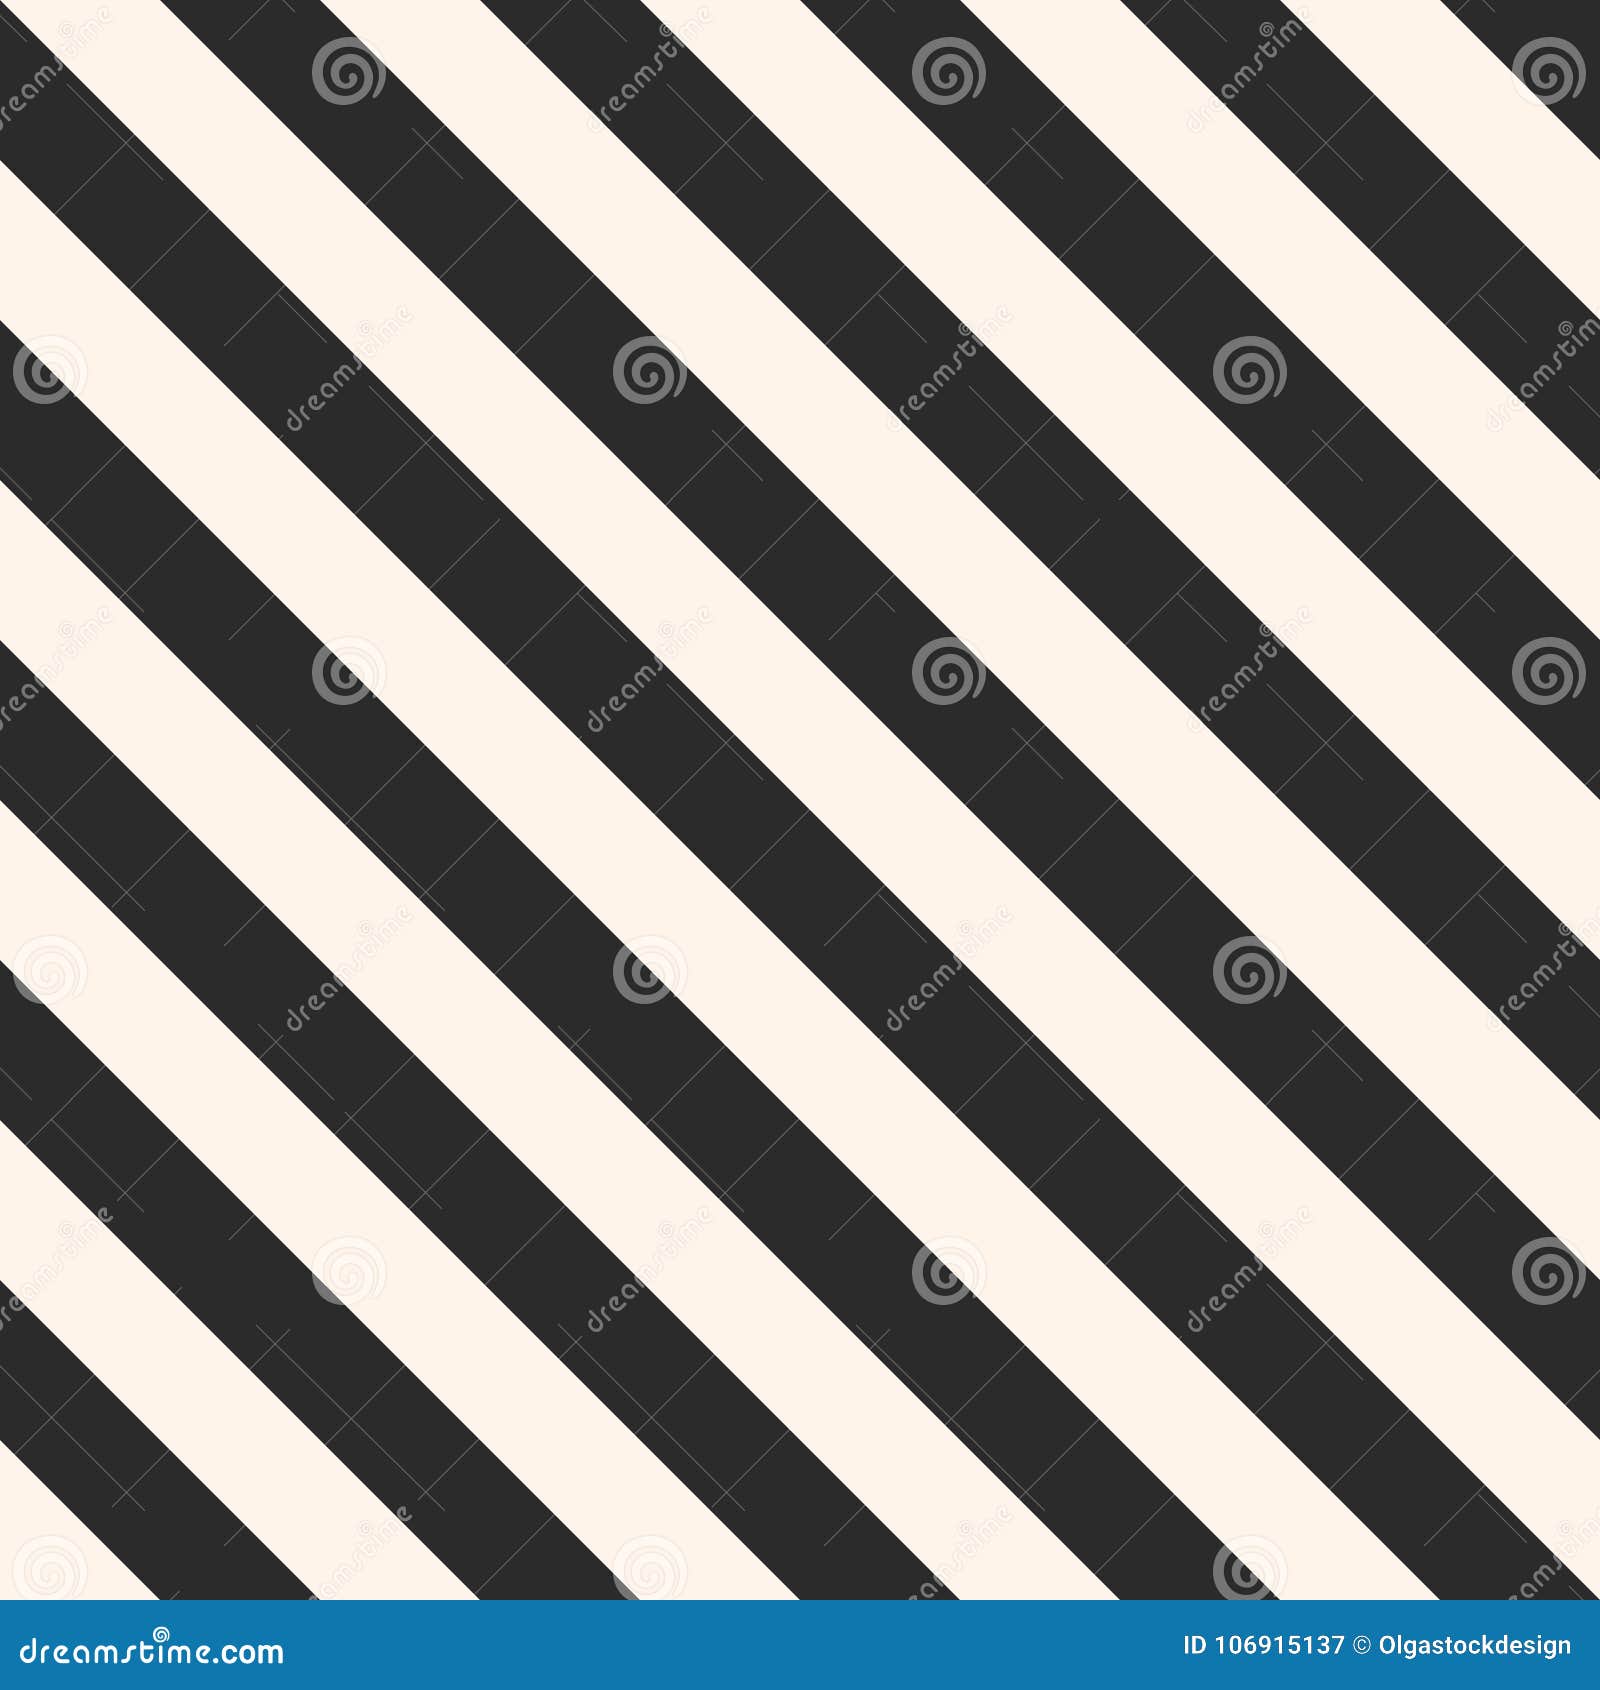 Diagonal stripes pattern. Vector seamless striped texture. Abstract  monochrome geometric background with thin parallel slanted lines. Simple  stylish repeat design for tileable print, decoration, cover Stock Vector